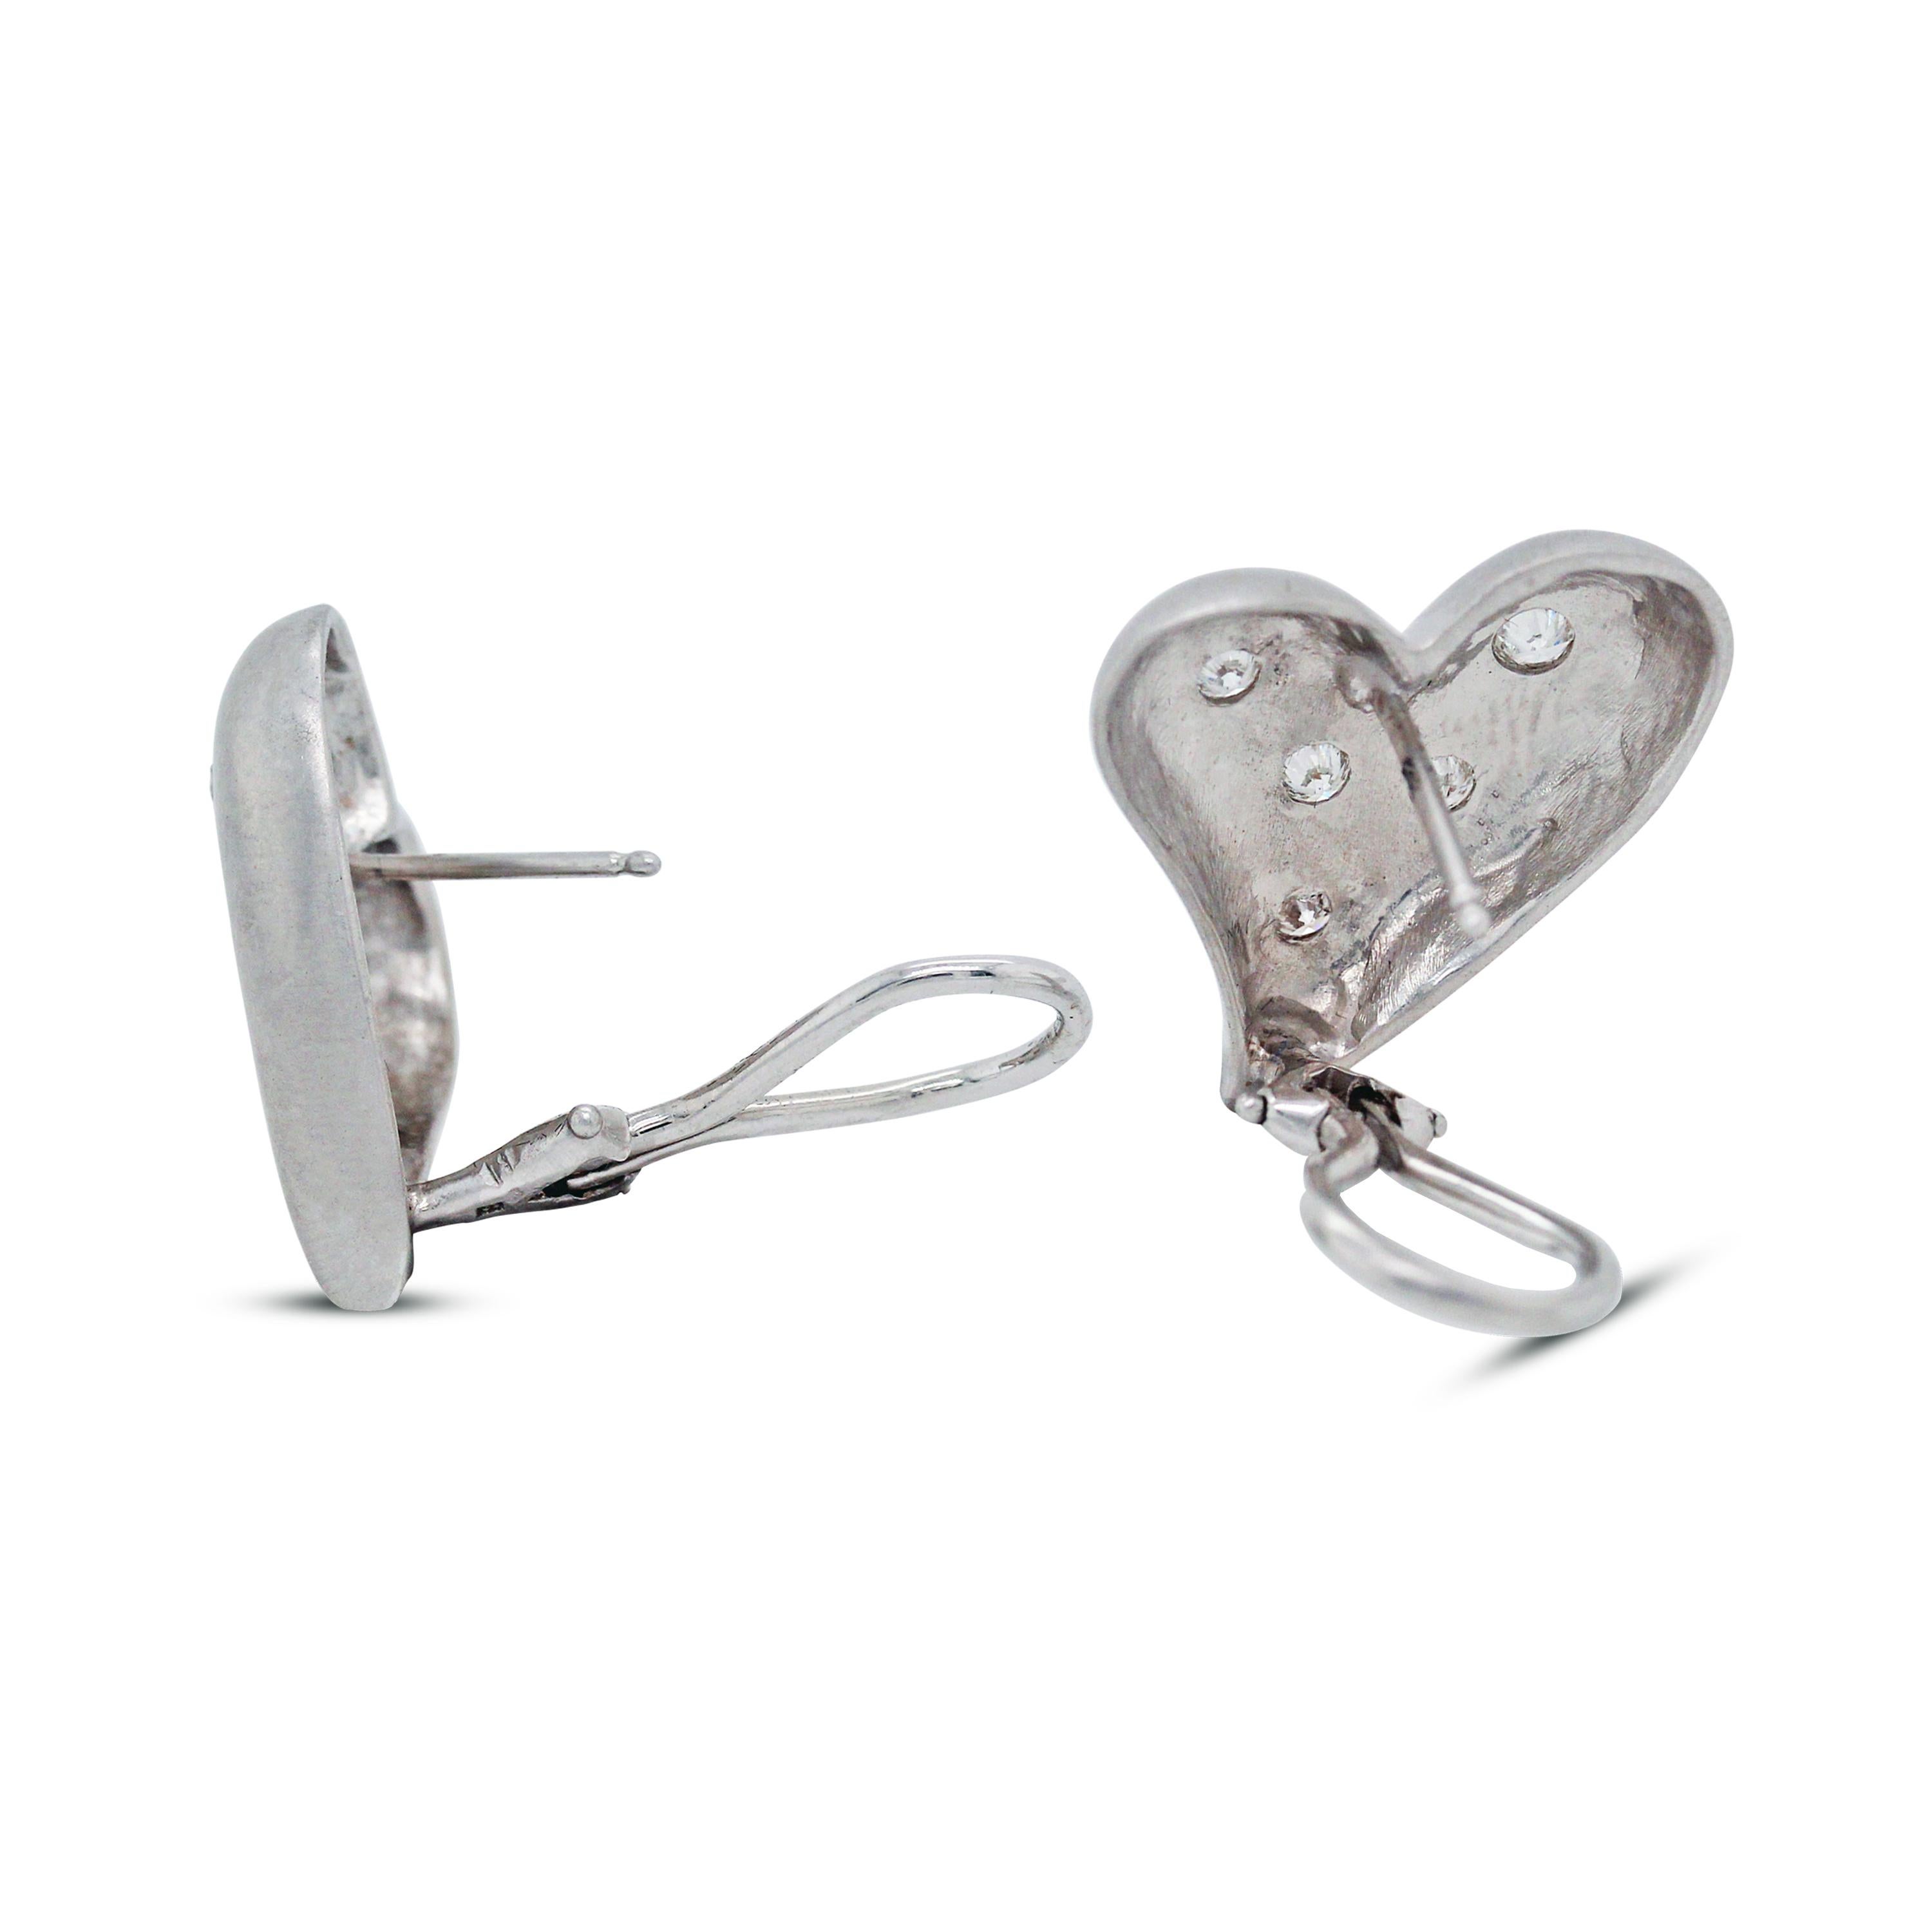 18K White Gold and Diamond Heart Earrings

These brushed-finished, white gold earrings feature five diamonds in each earring. Total weight, apprx. 0.50 carat diamonds G color, VS clarity

The earrings have a post and omega back for comfortable wear